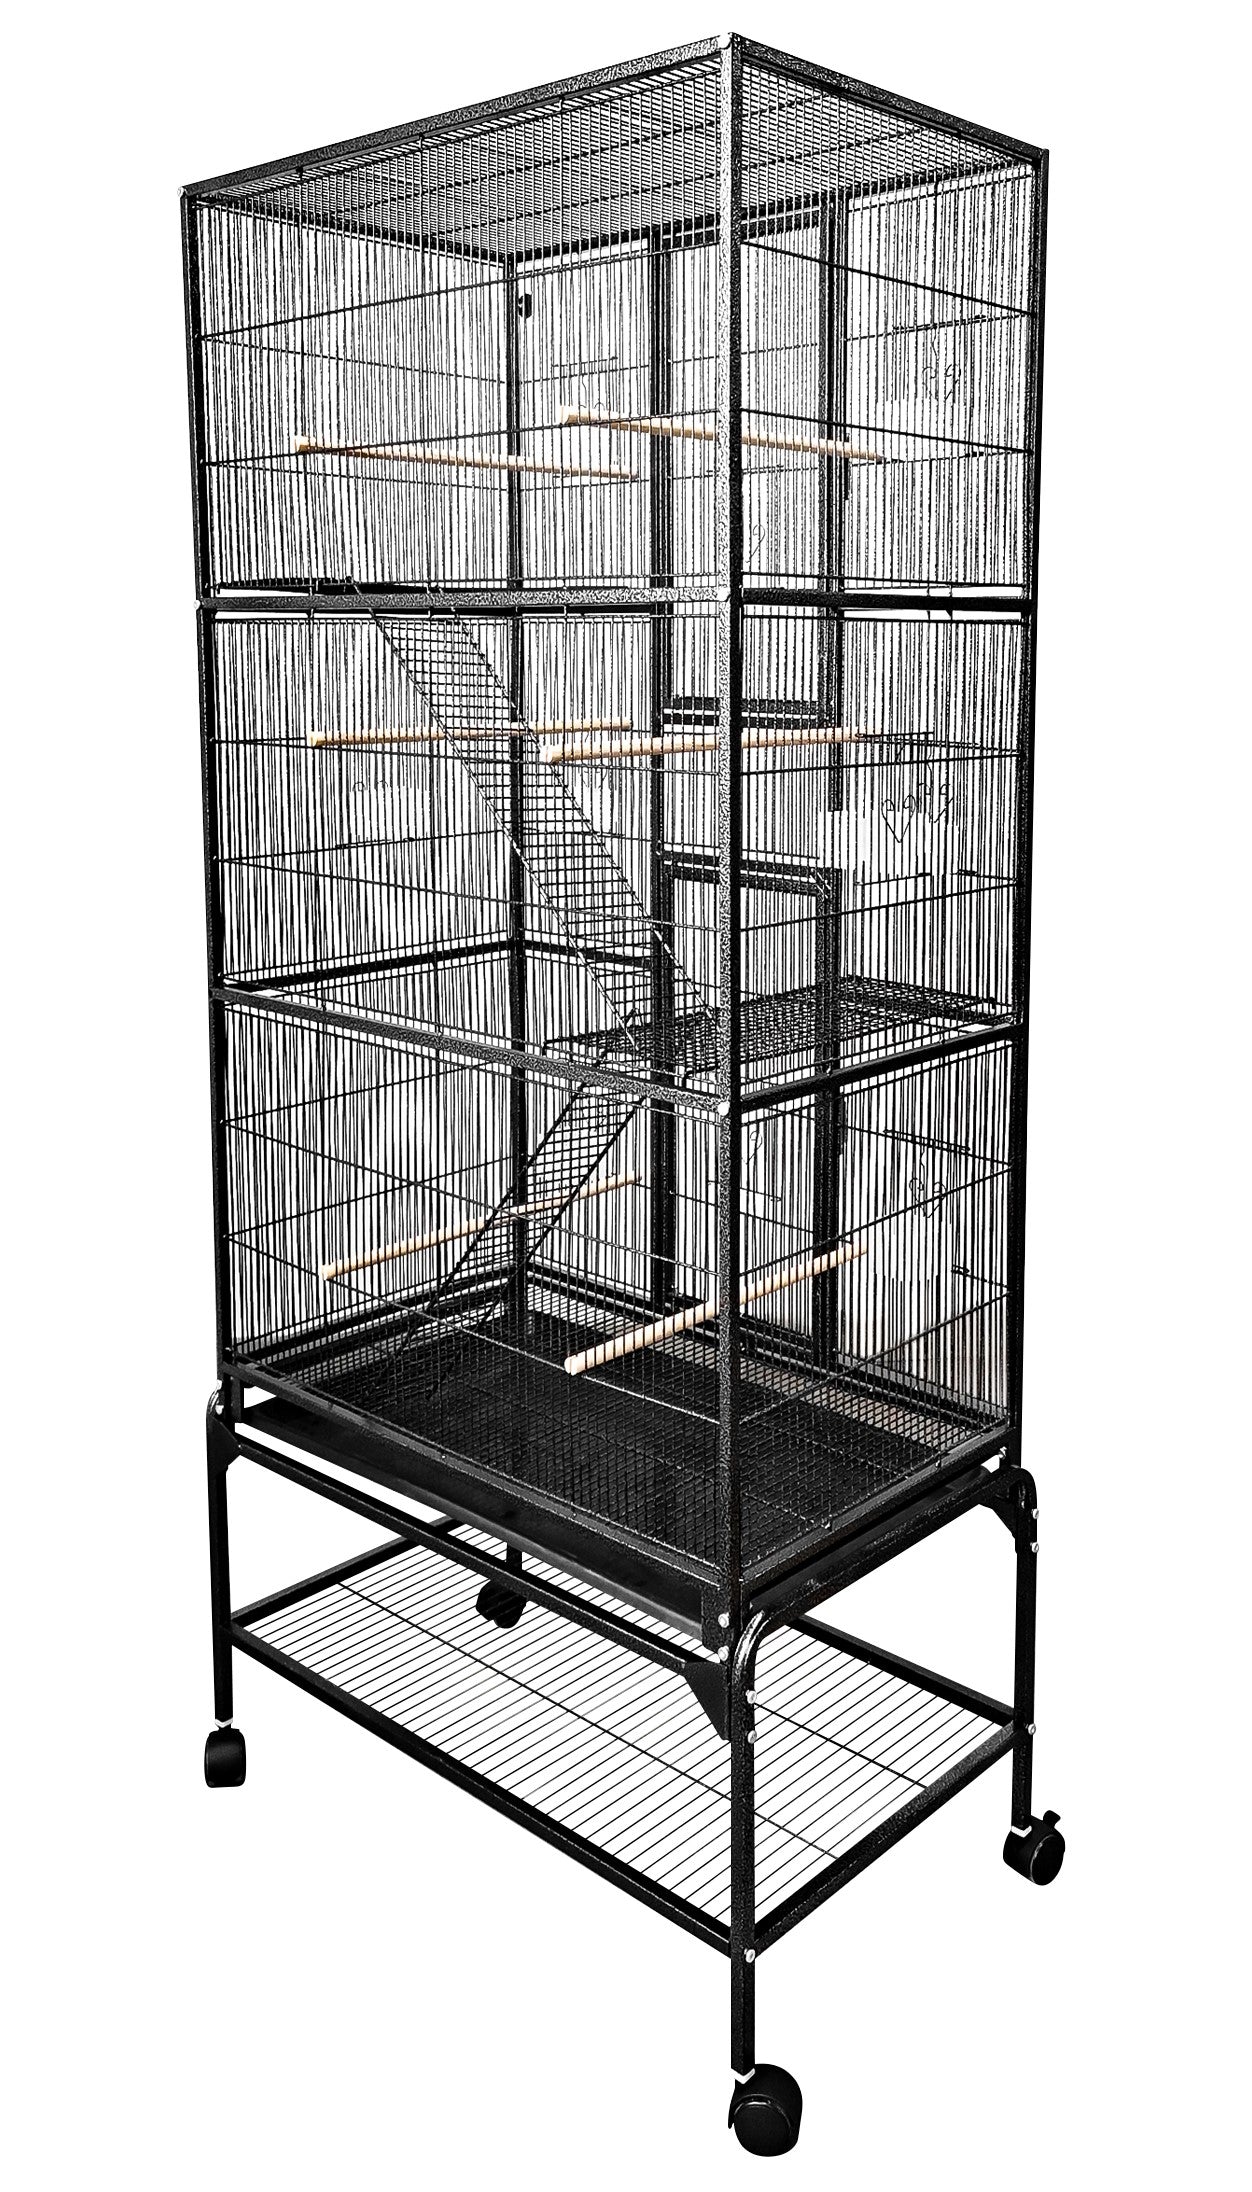 A&E Cage Co. 32"x18" Multi Level Flight Cage with Ladders